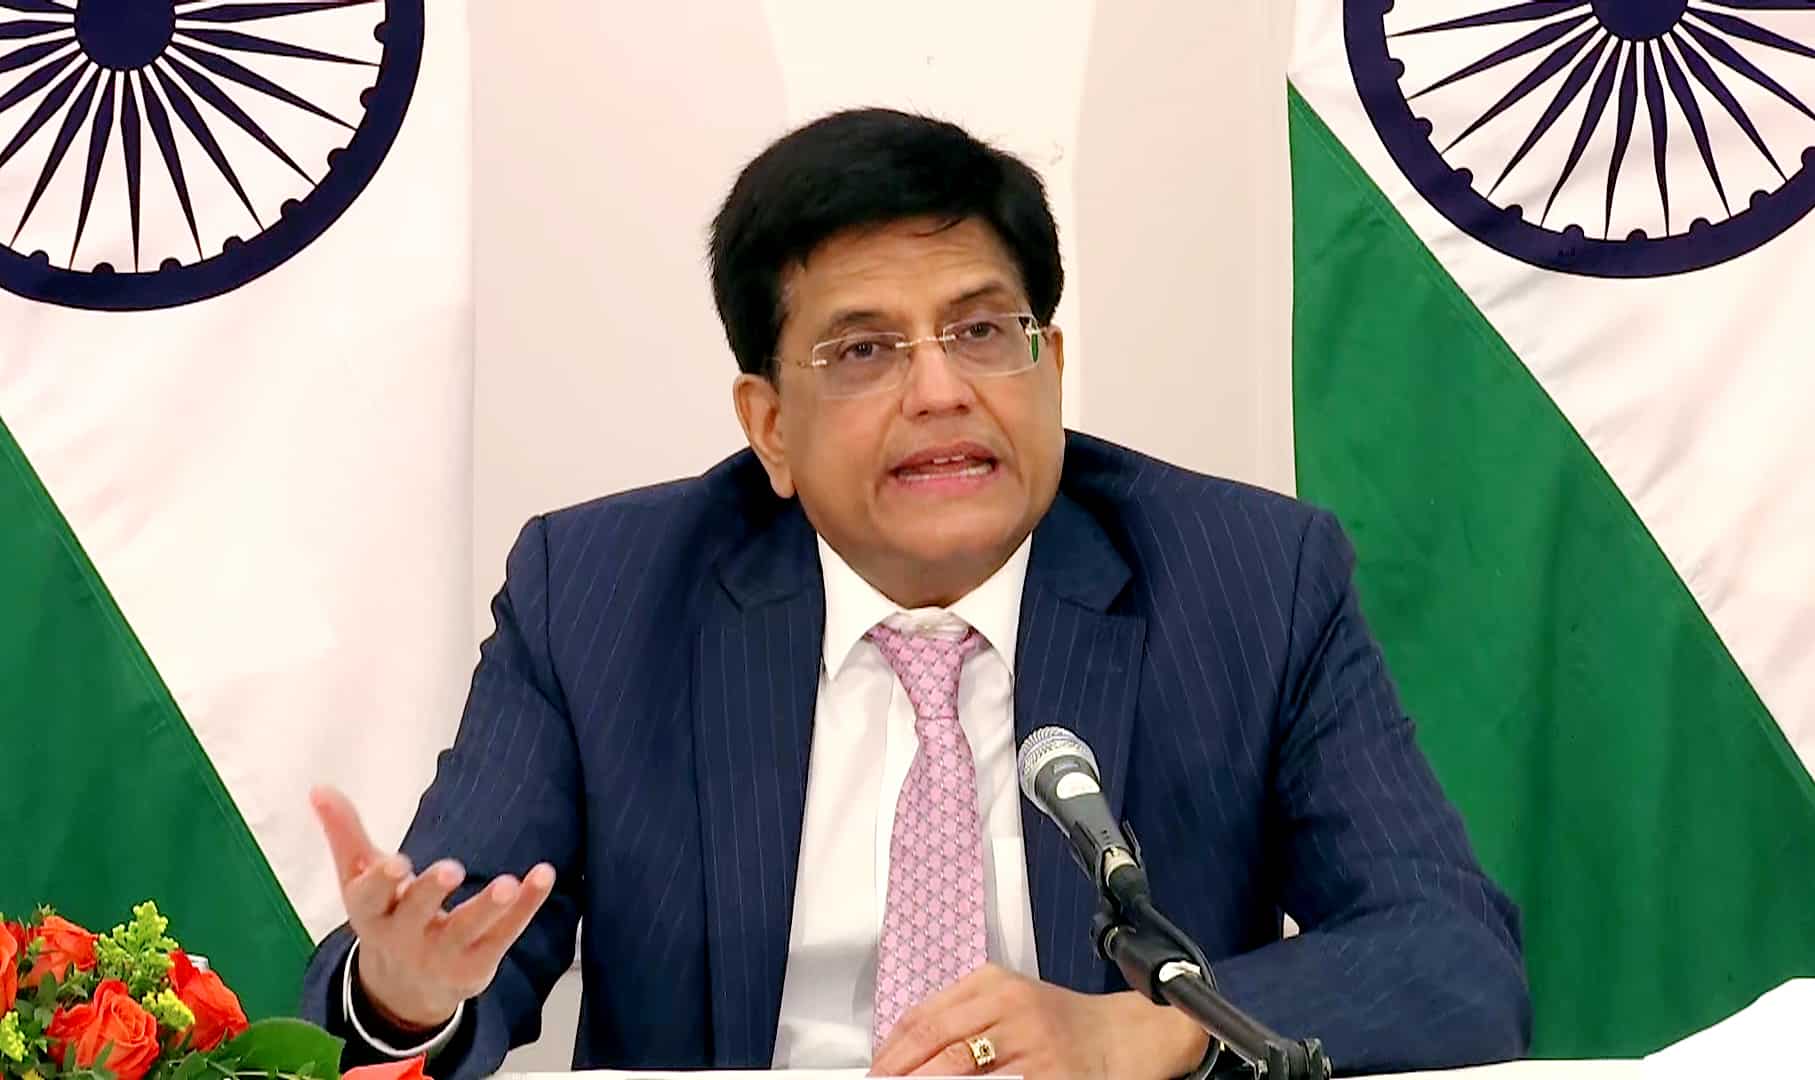 Indian minister Piyush Goyal urges global leaders to take local weather action as opportunity, no longer burden